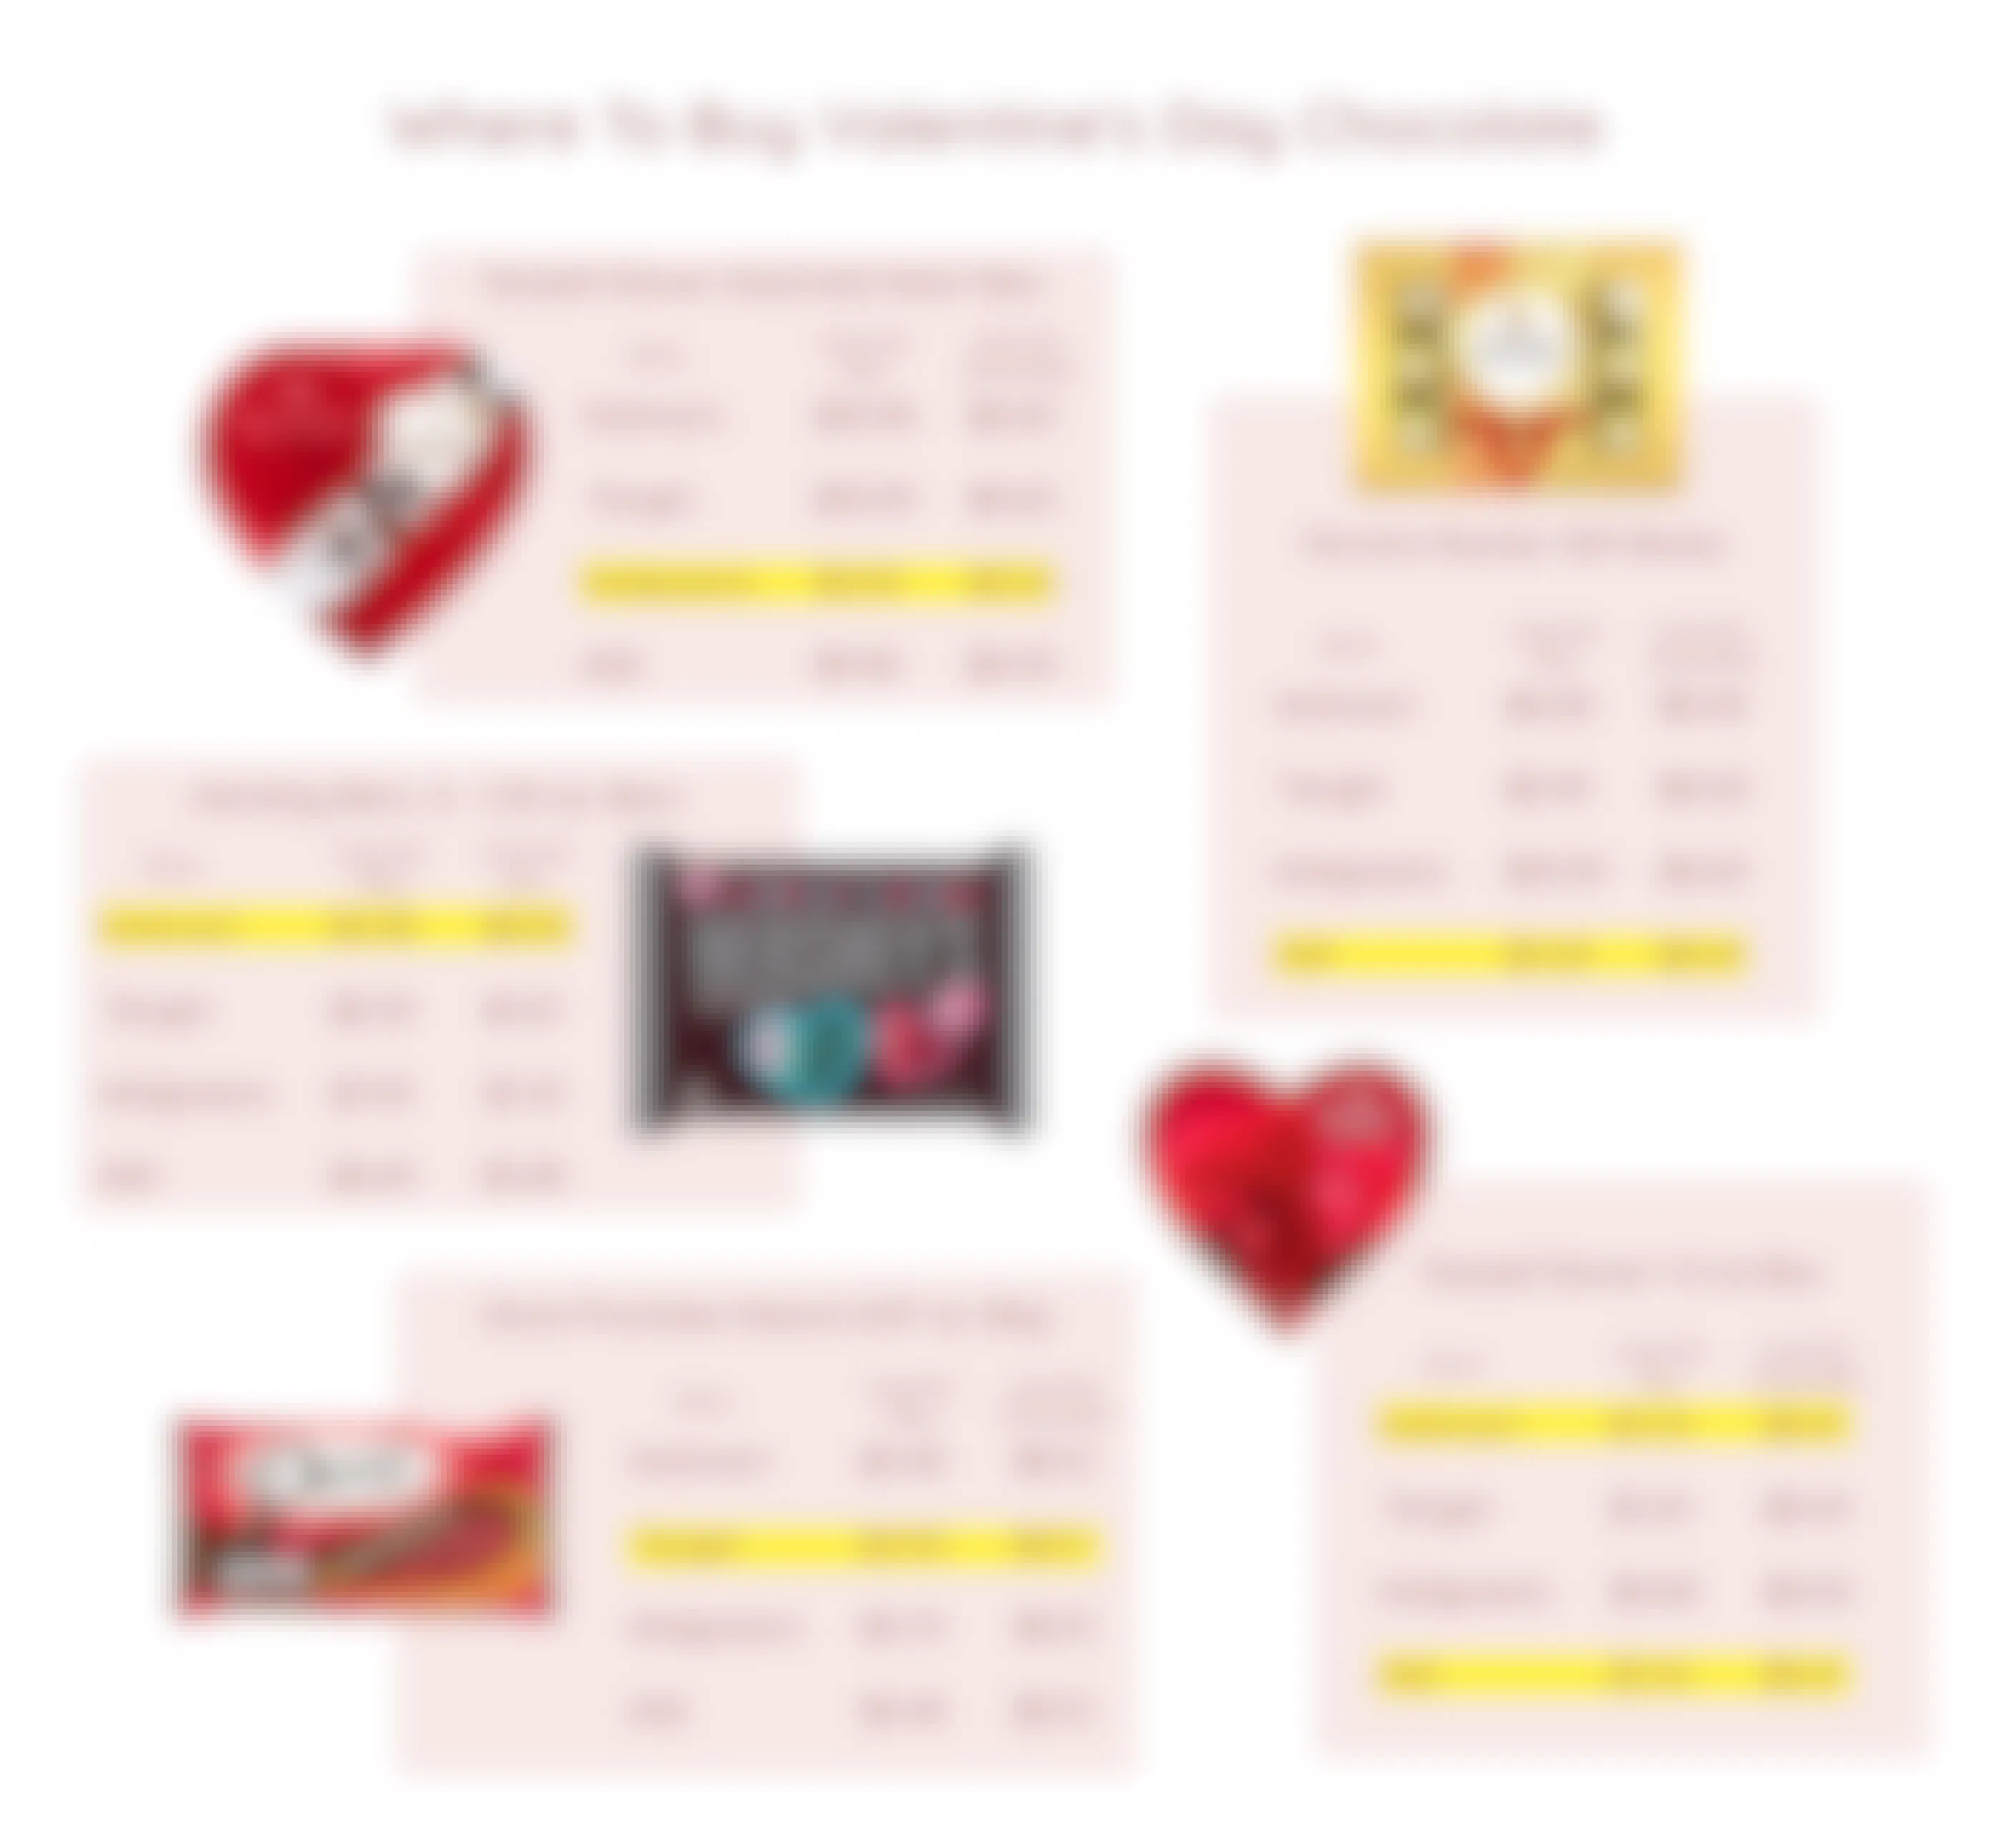 graphic showing price comparison for valentines day chocolate between walmart, target, walgreens, and aldi